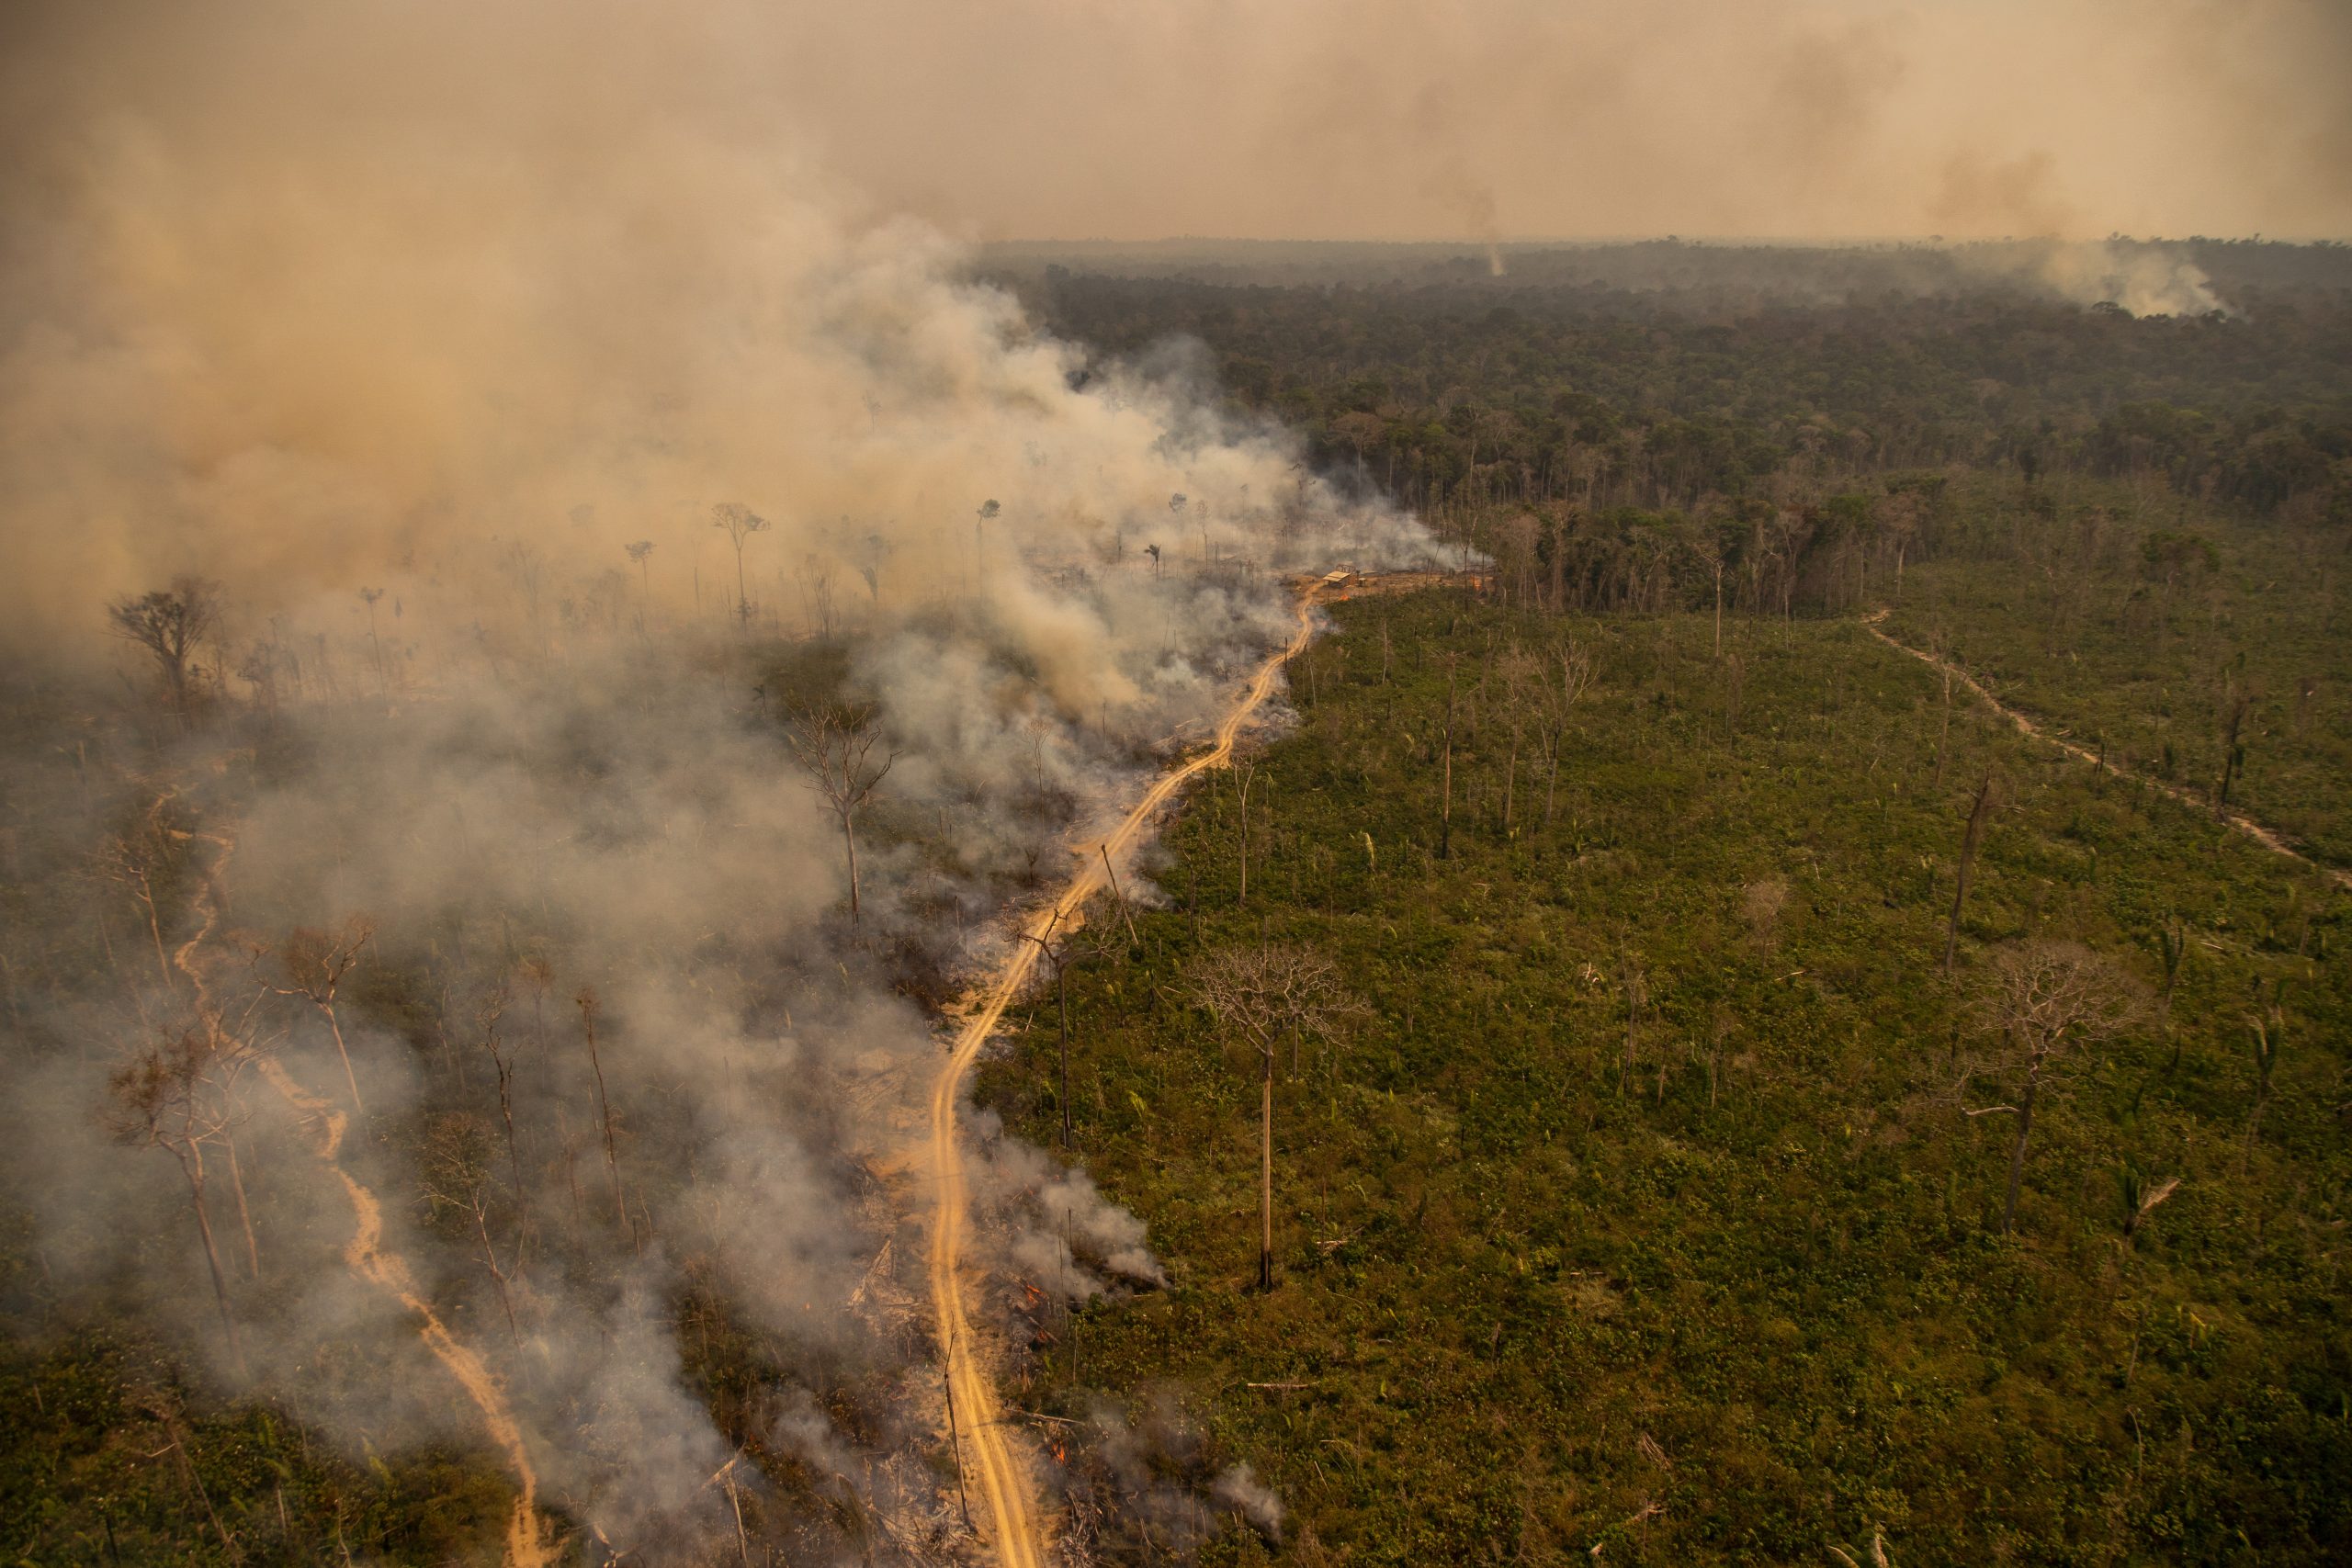 Aerial view of a fire in the Jaci-Paraná Extractive Reserve, in Porto Velho, Rondônia state, Brazil